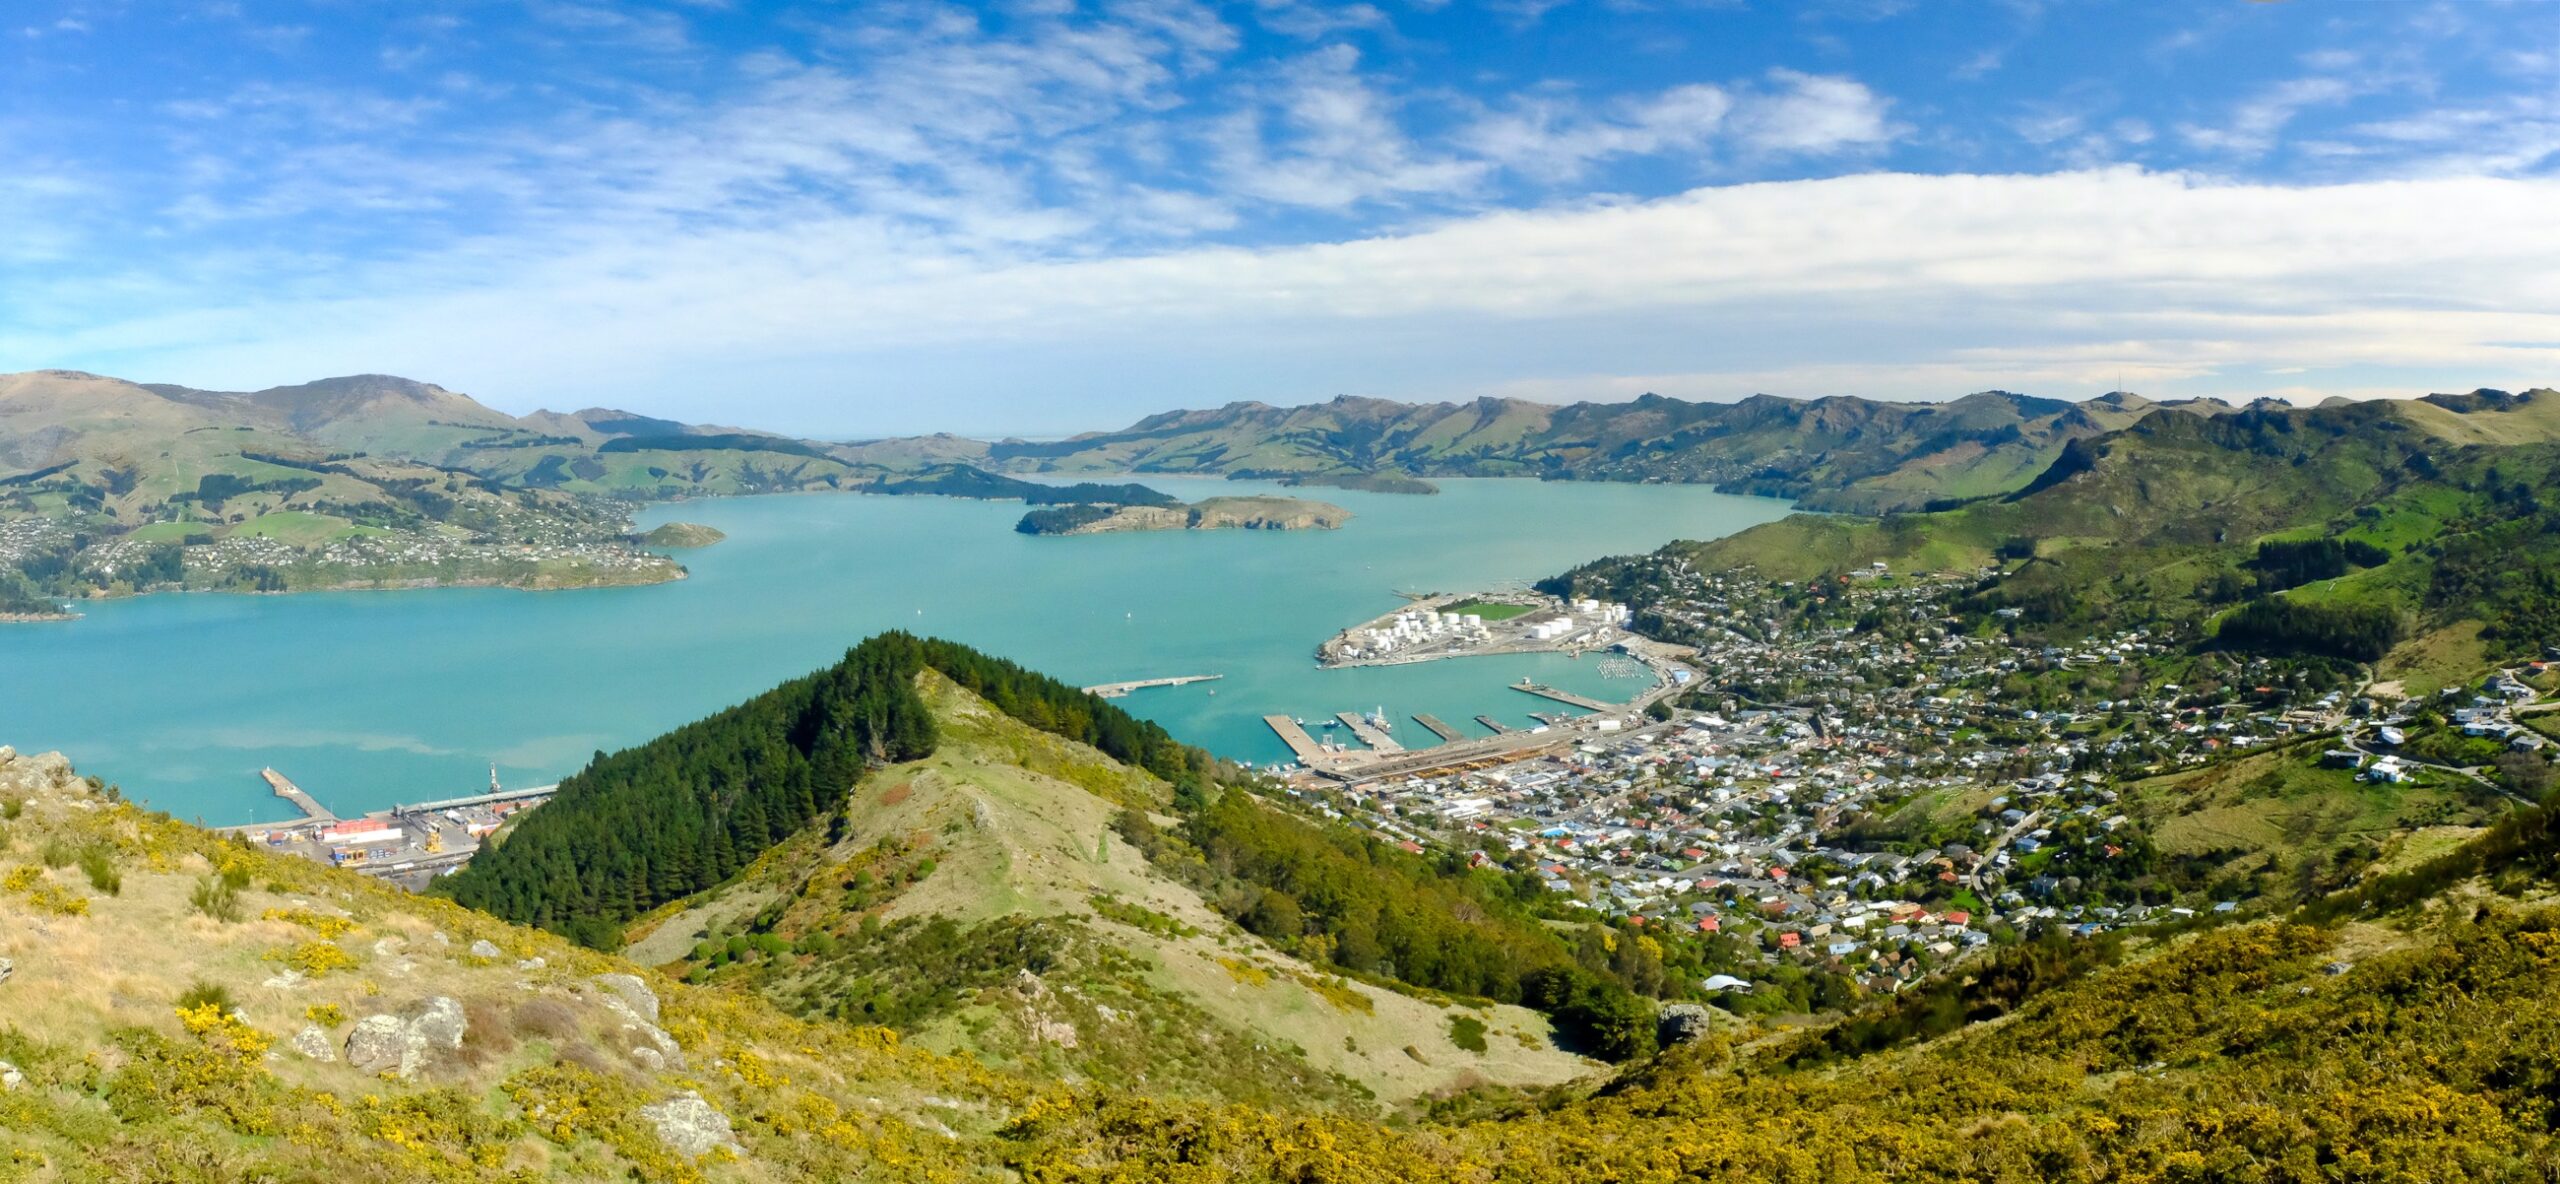 Christchurch: The City Rising from the Rubble: Top Places to Visit